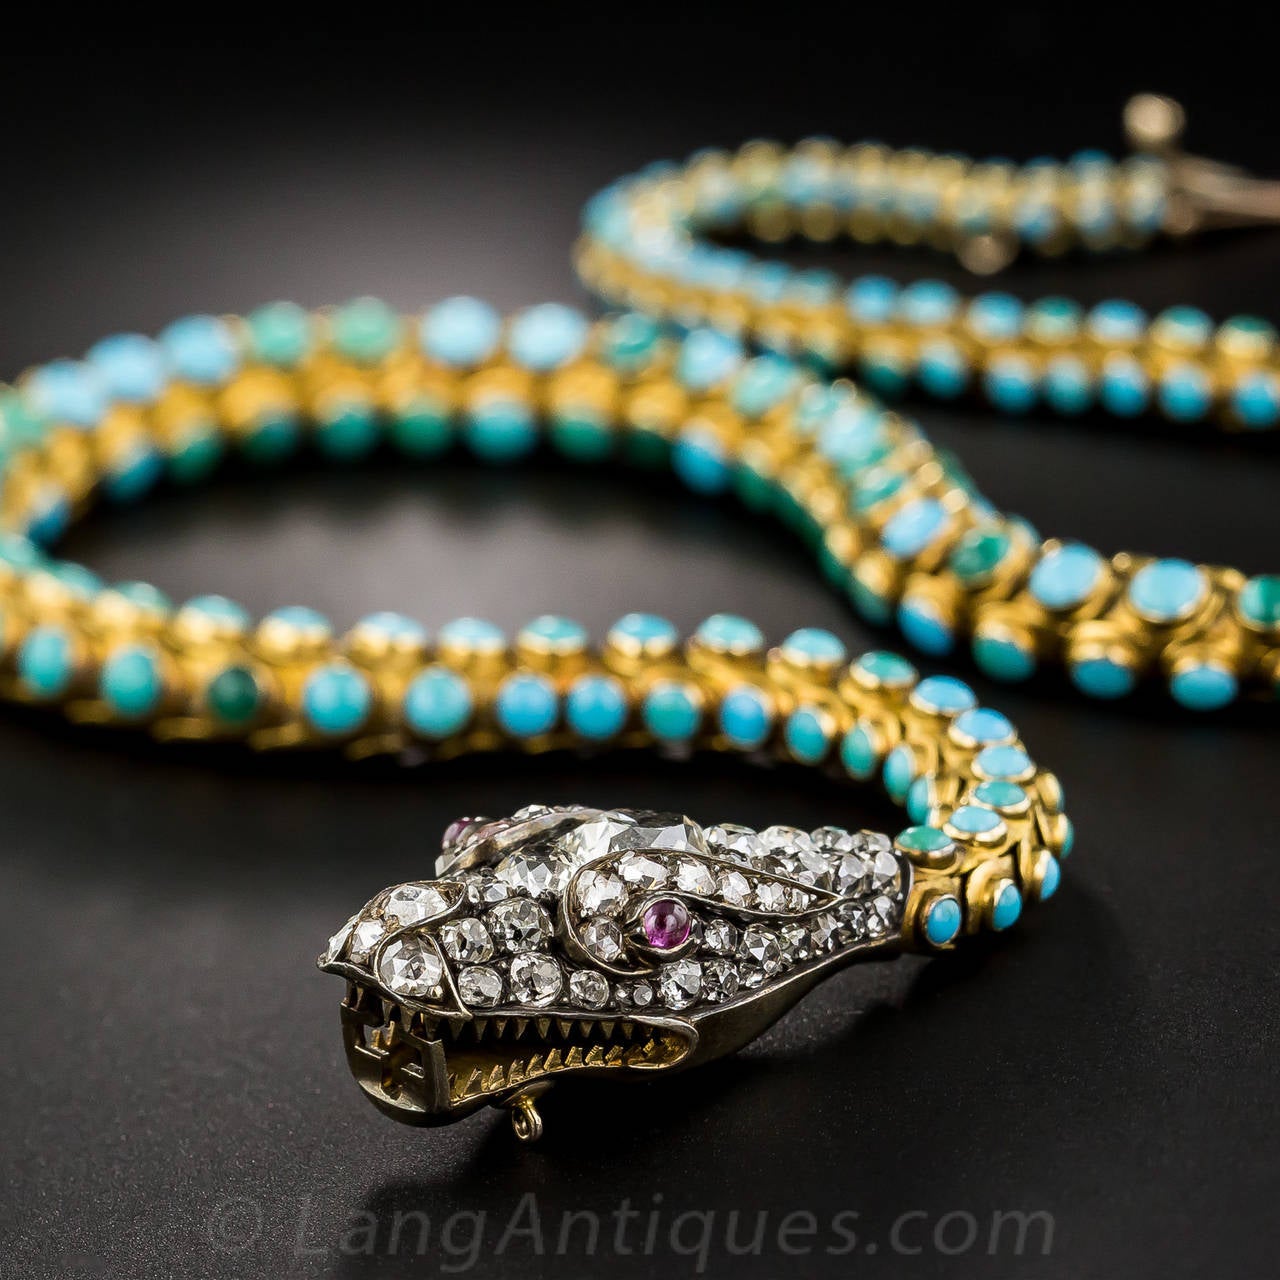 A fabulous nineteenth-century serpent, her silver head aglitter with 4 carats of bright, sparkling white old mine-cut diamonds (including an almost one carat pear shape), is customarily swallowing its own lithe and supple tail, this one composed of